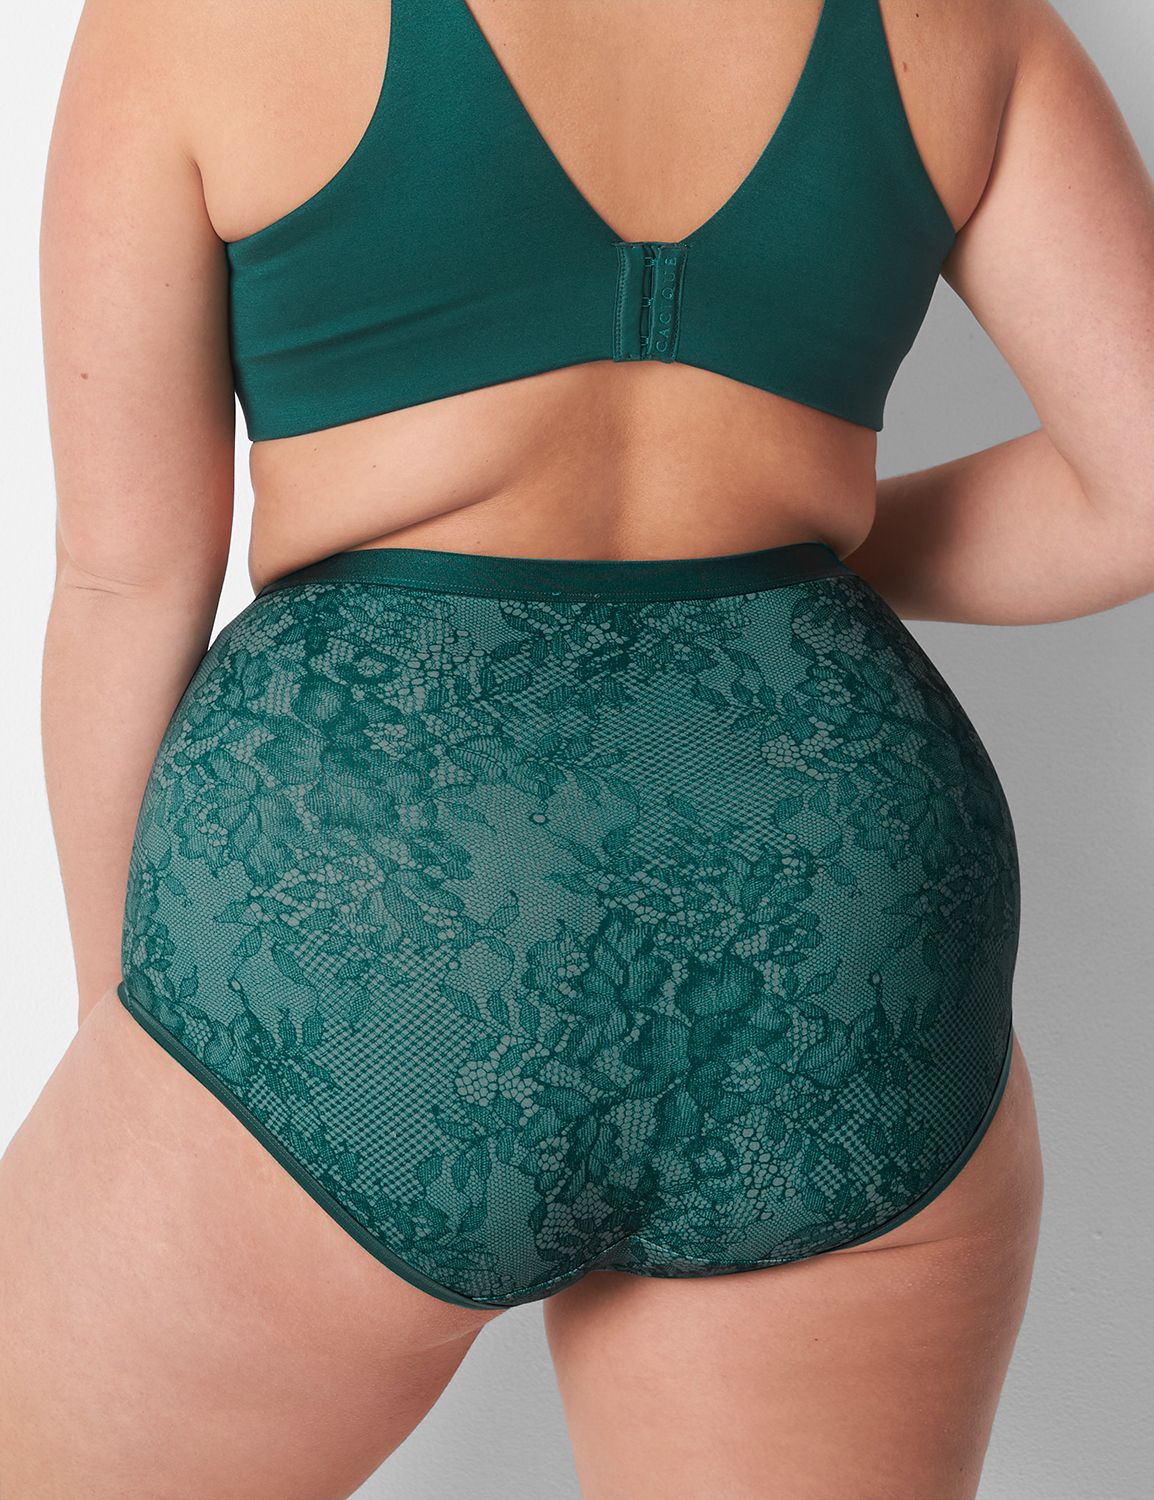 Plus Size Emerald Green High Hopes Bra & High Waist Panty Set- Spicy  Lingerie